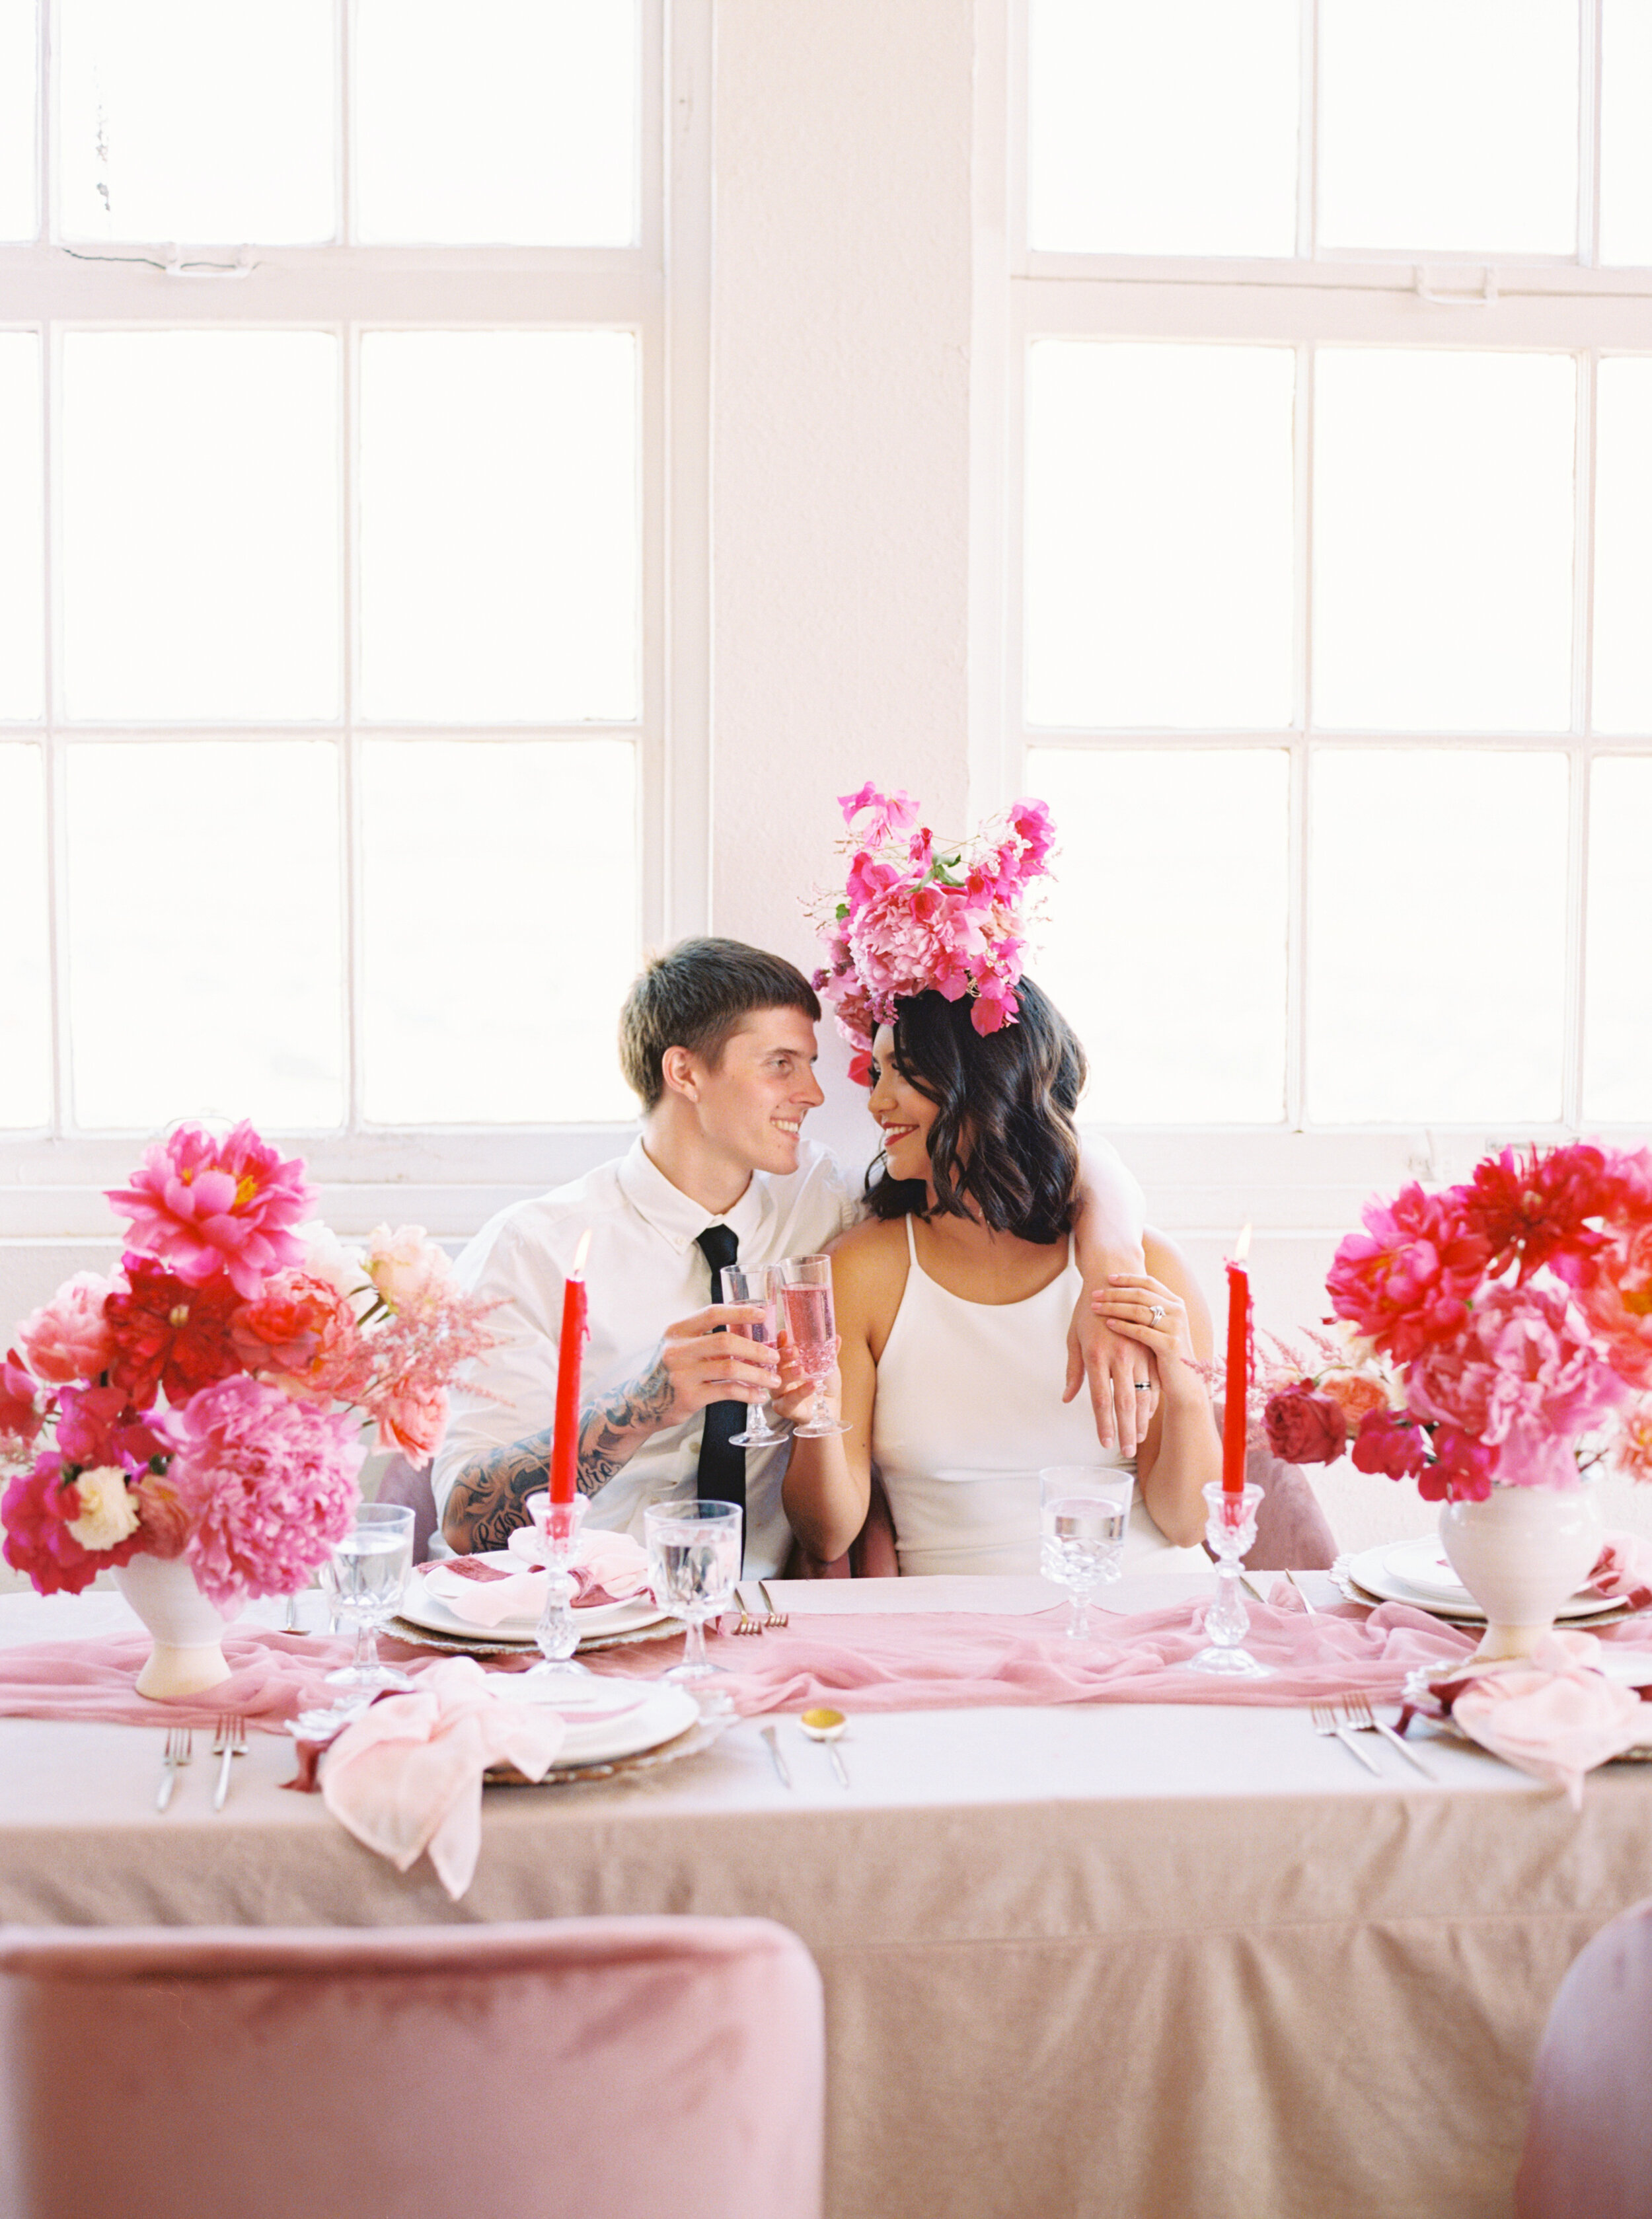 A Romantic Wedding Elopement Filled with Colorful Fuchsia - Sarahi Hadden Submission-39.jpg